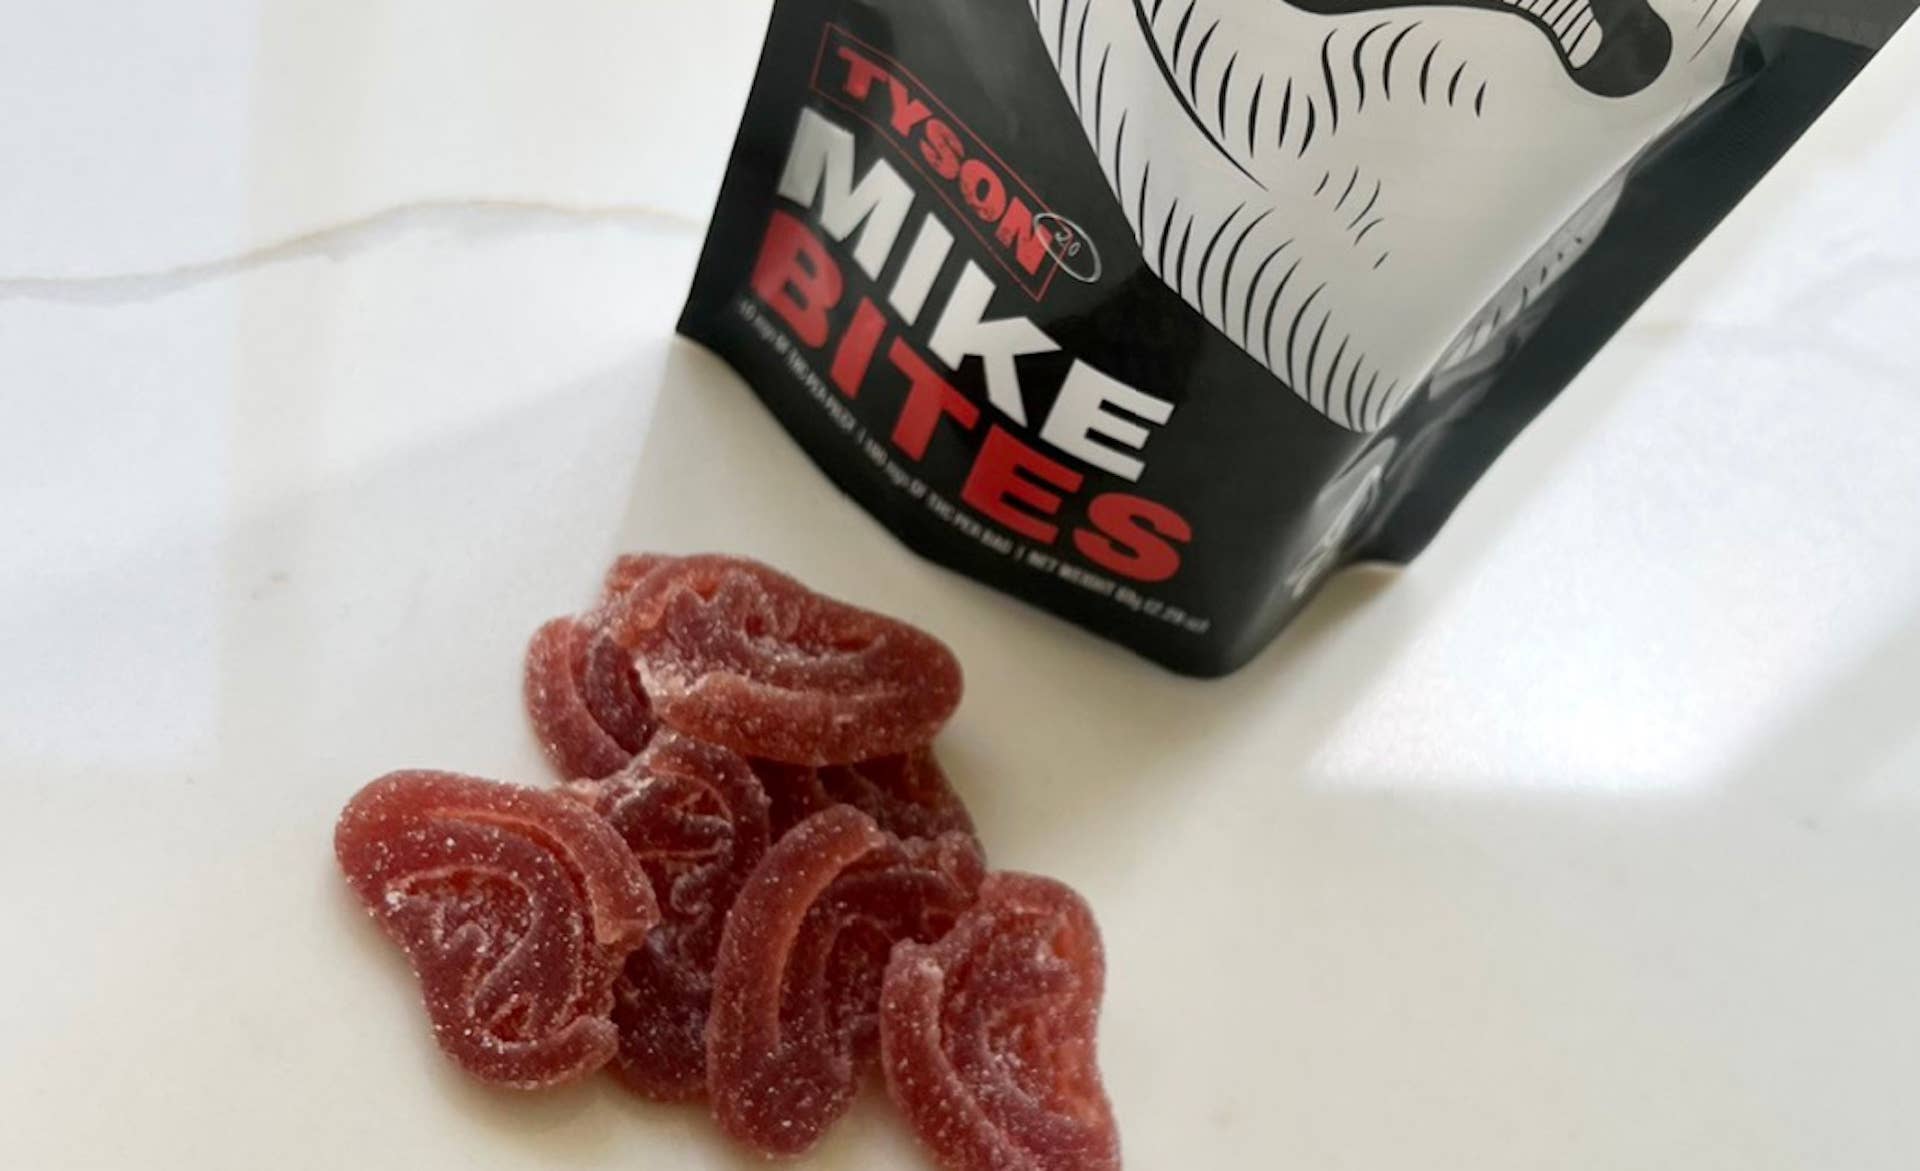 Mike Tyson's ear-shaped weed gummies 'Mike Bites'